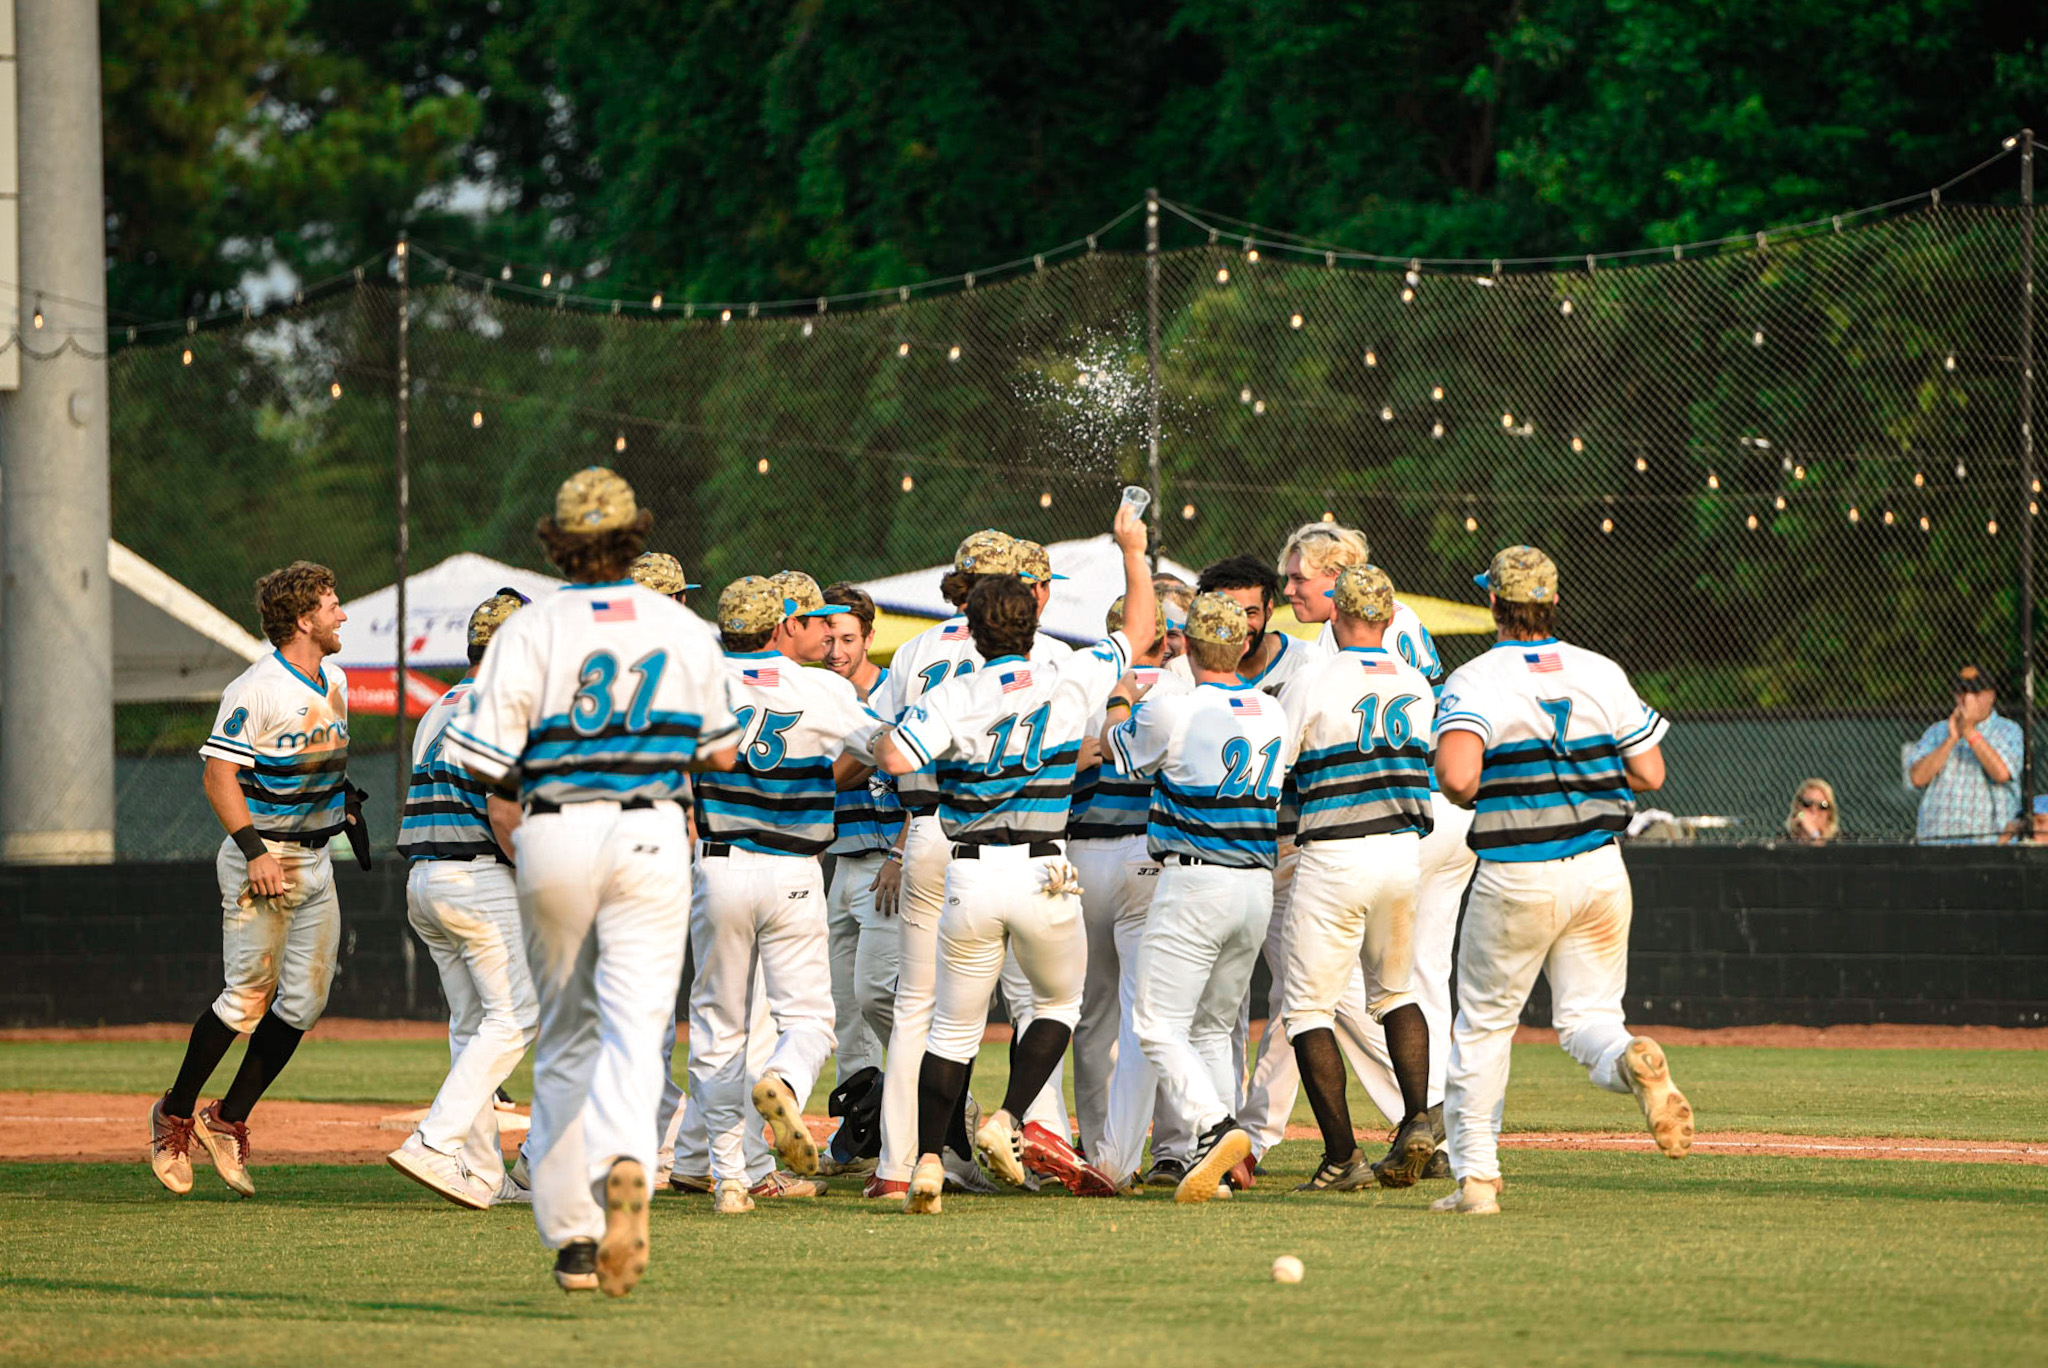 Morehead City Marlins Clinch Playoff Berth and First Half Division Title with Doubleheader Sweep